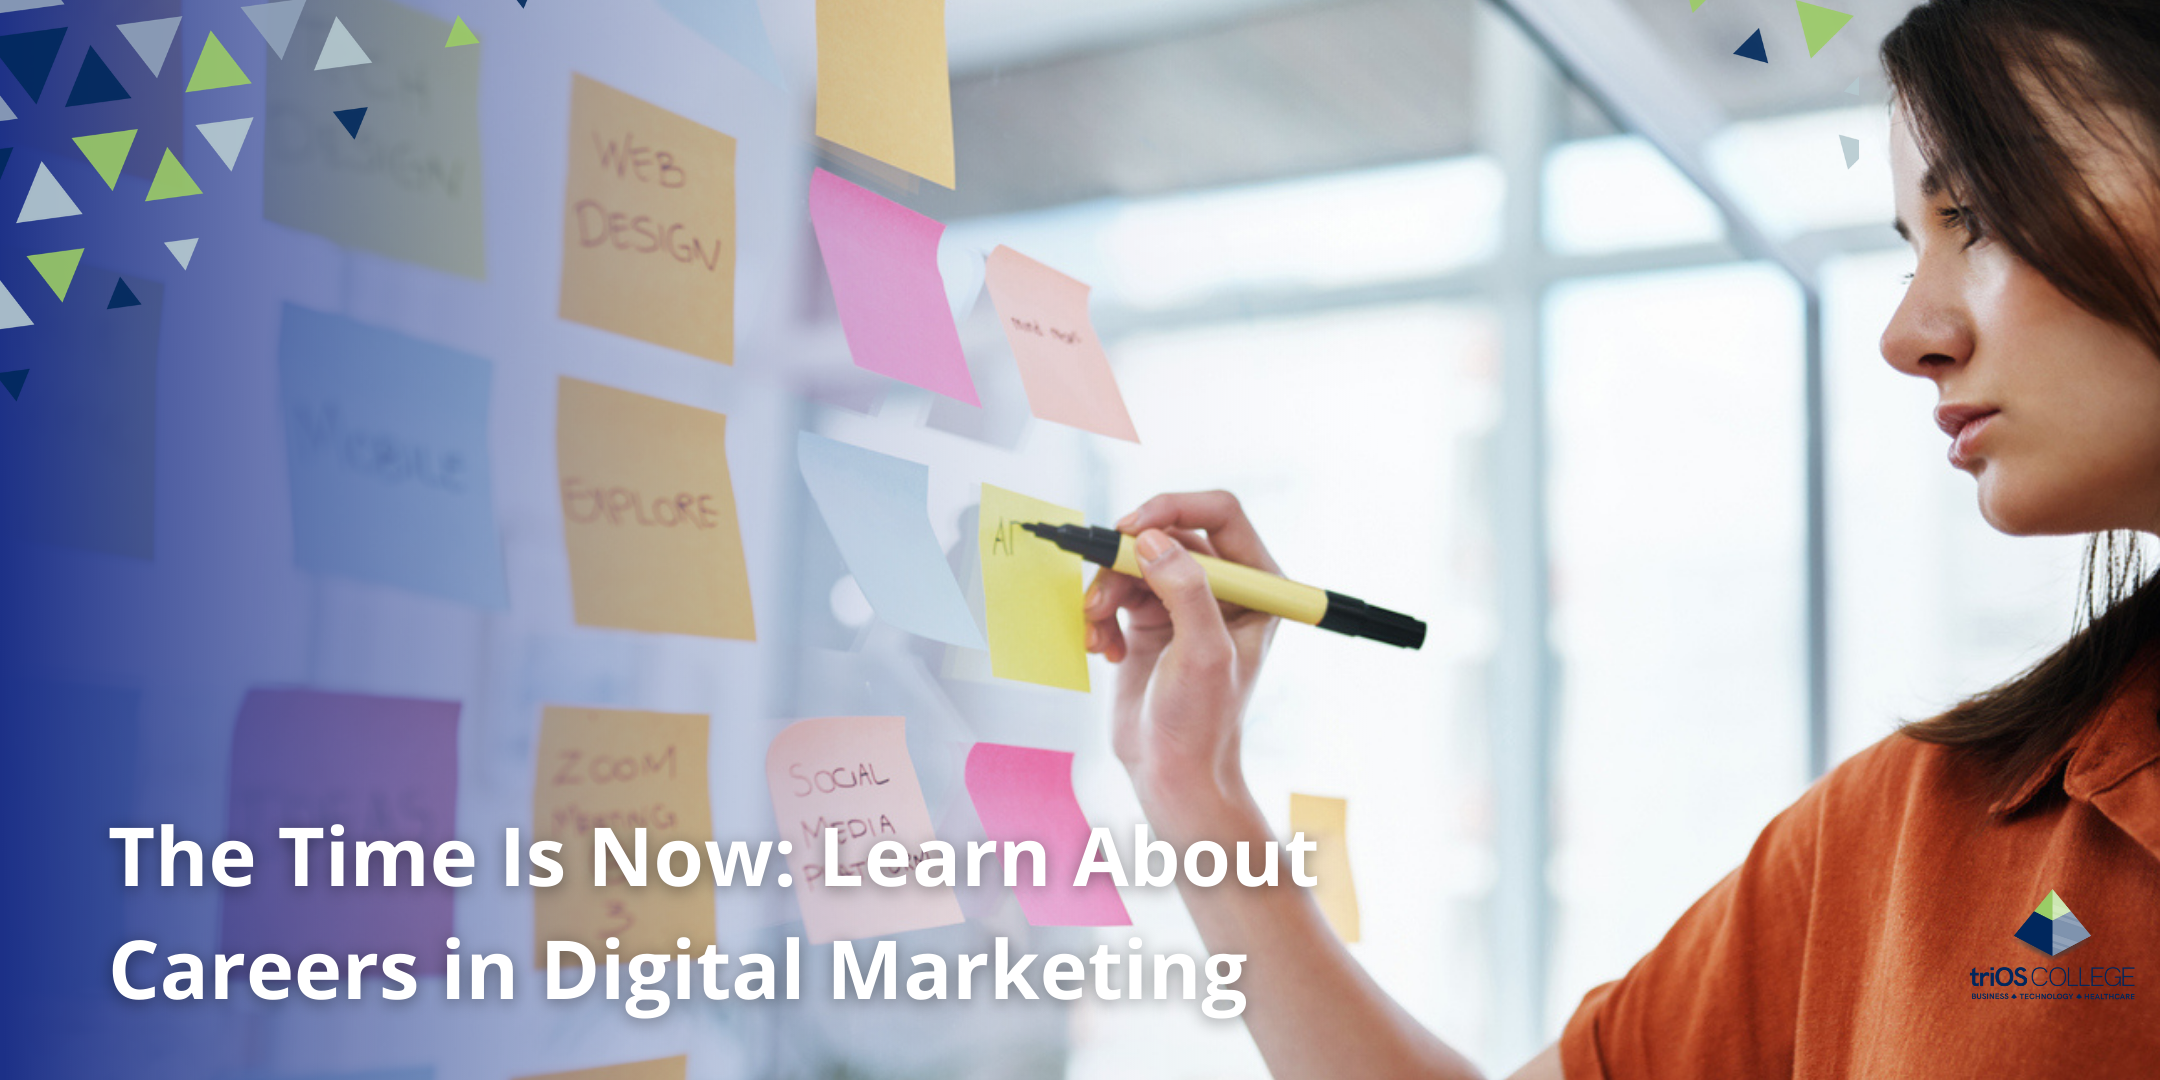 The Time Is Now: Learn About Careers in Digital Marketing featured image